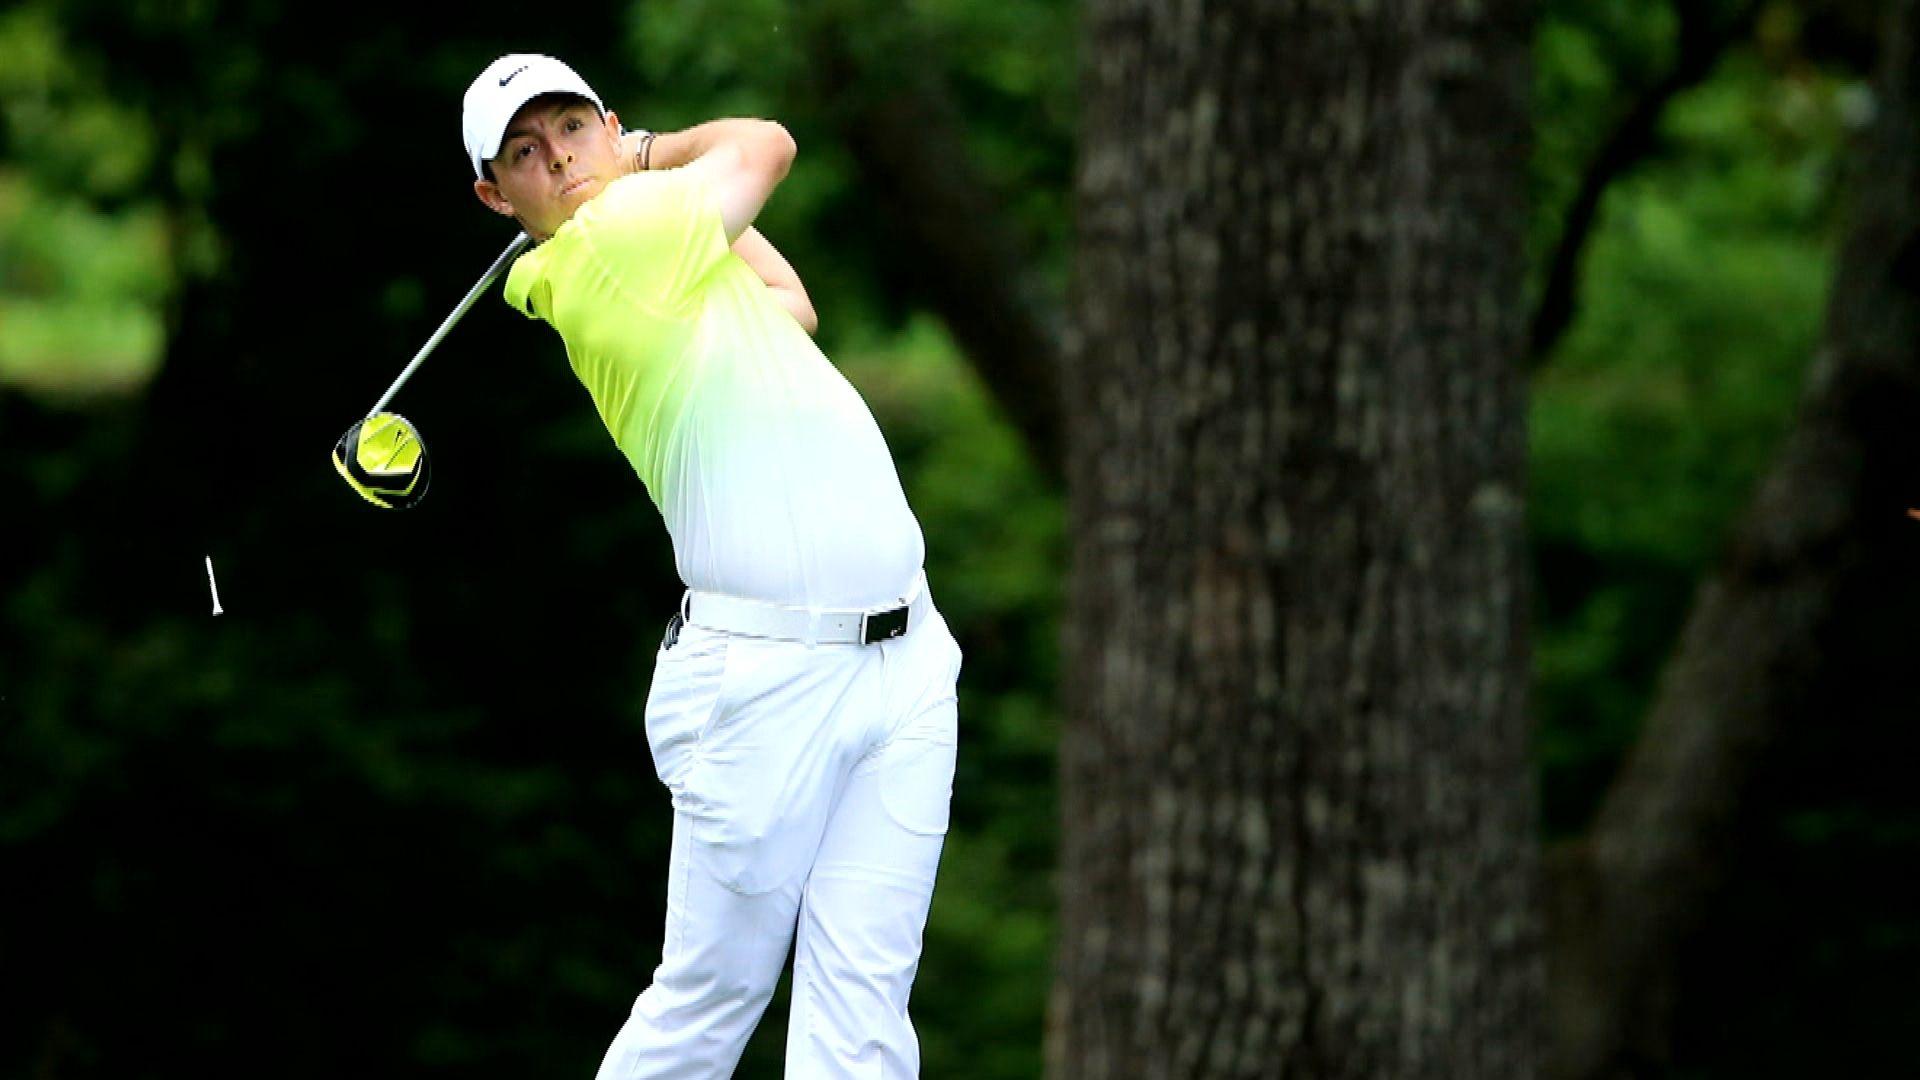 Rory McIlroy's performance at the 2015 Masters